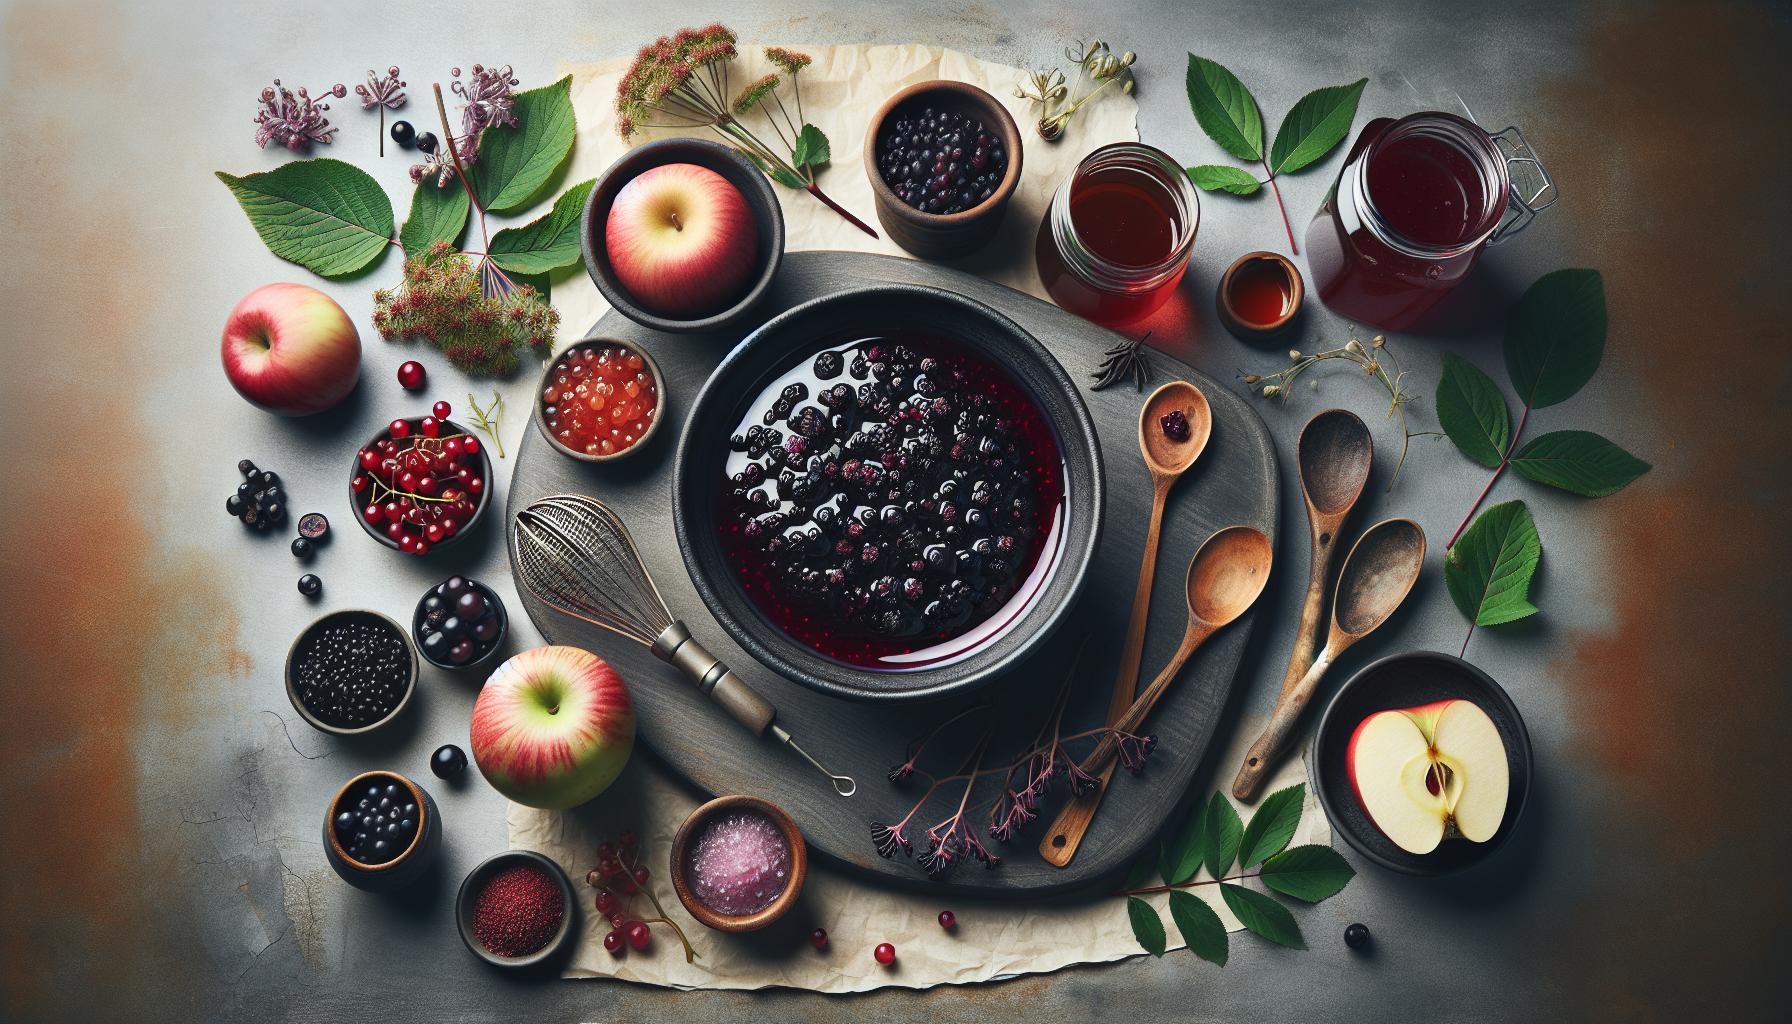 Delicious Homemade Elderberry Apple Jelly Recipe: A Unique Blend of Antioxidant-Rich Fruits!